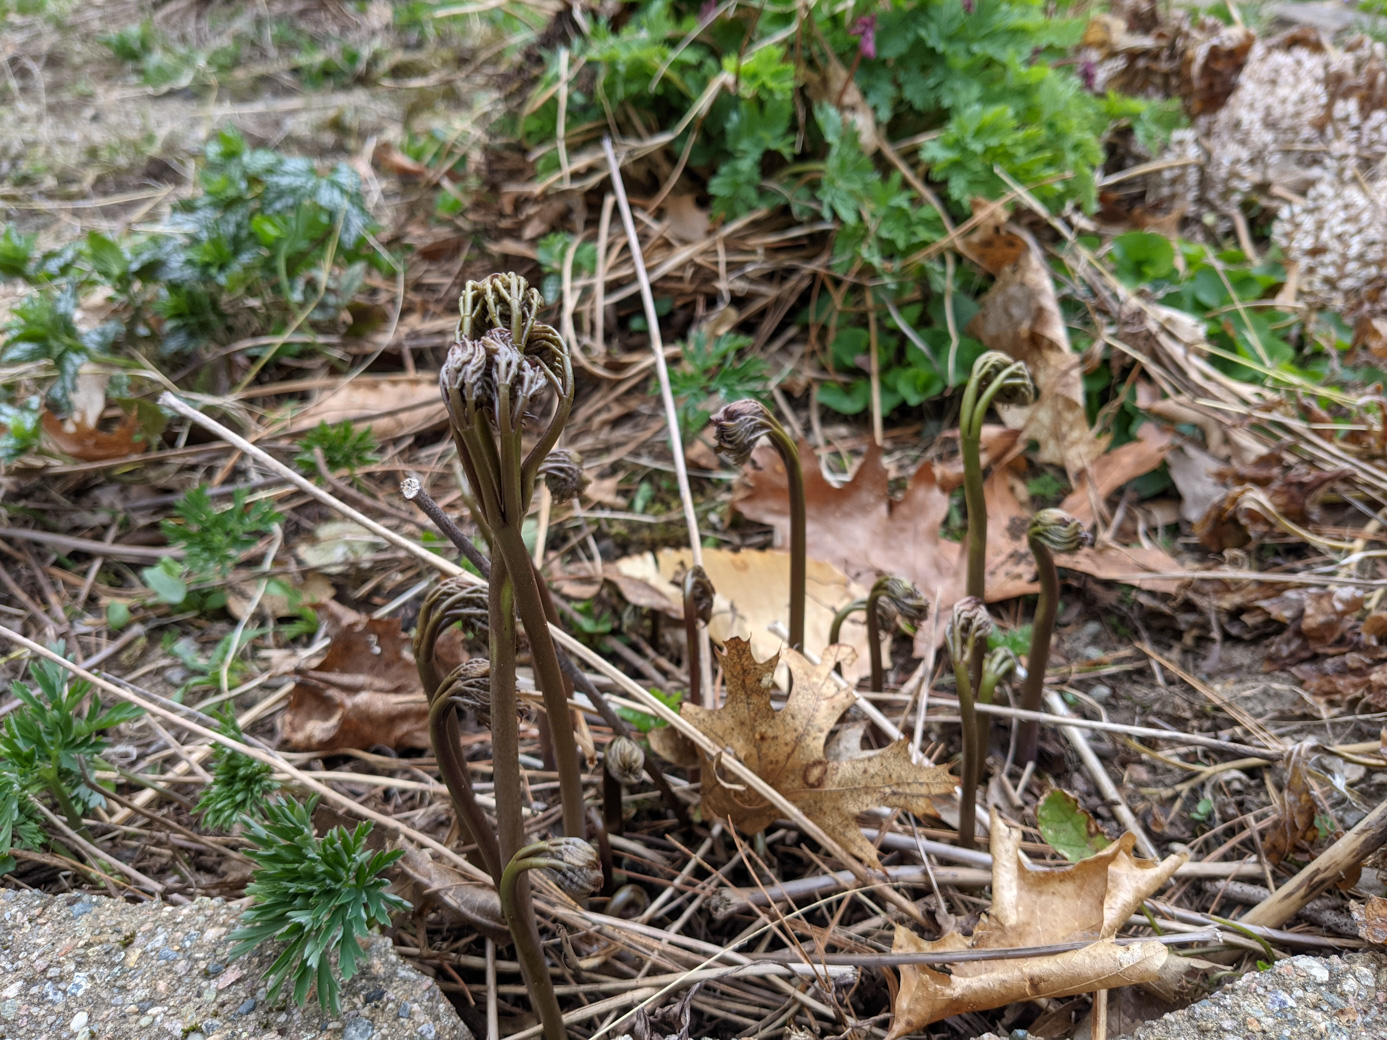 Baneberry plants sprouting in springtime